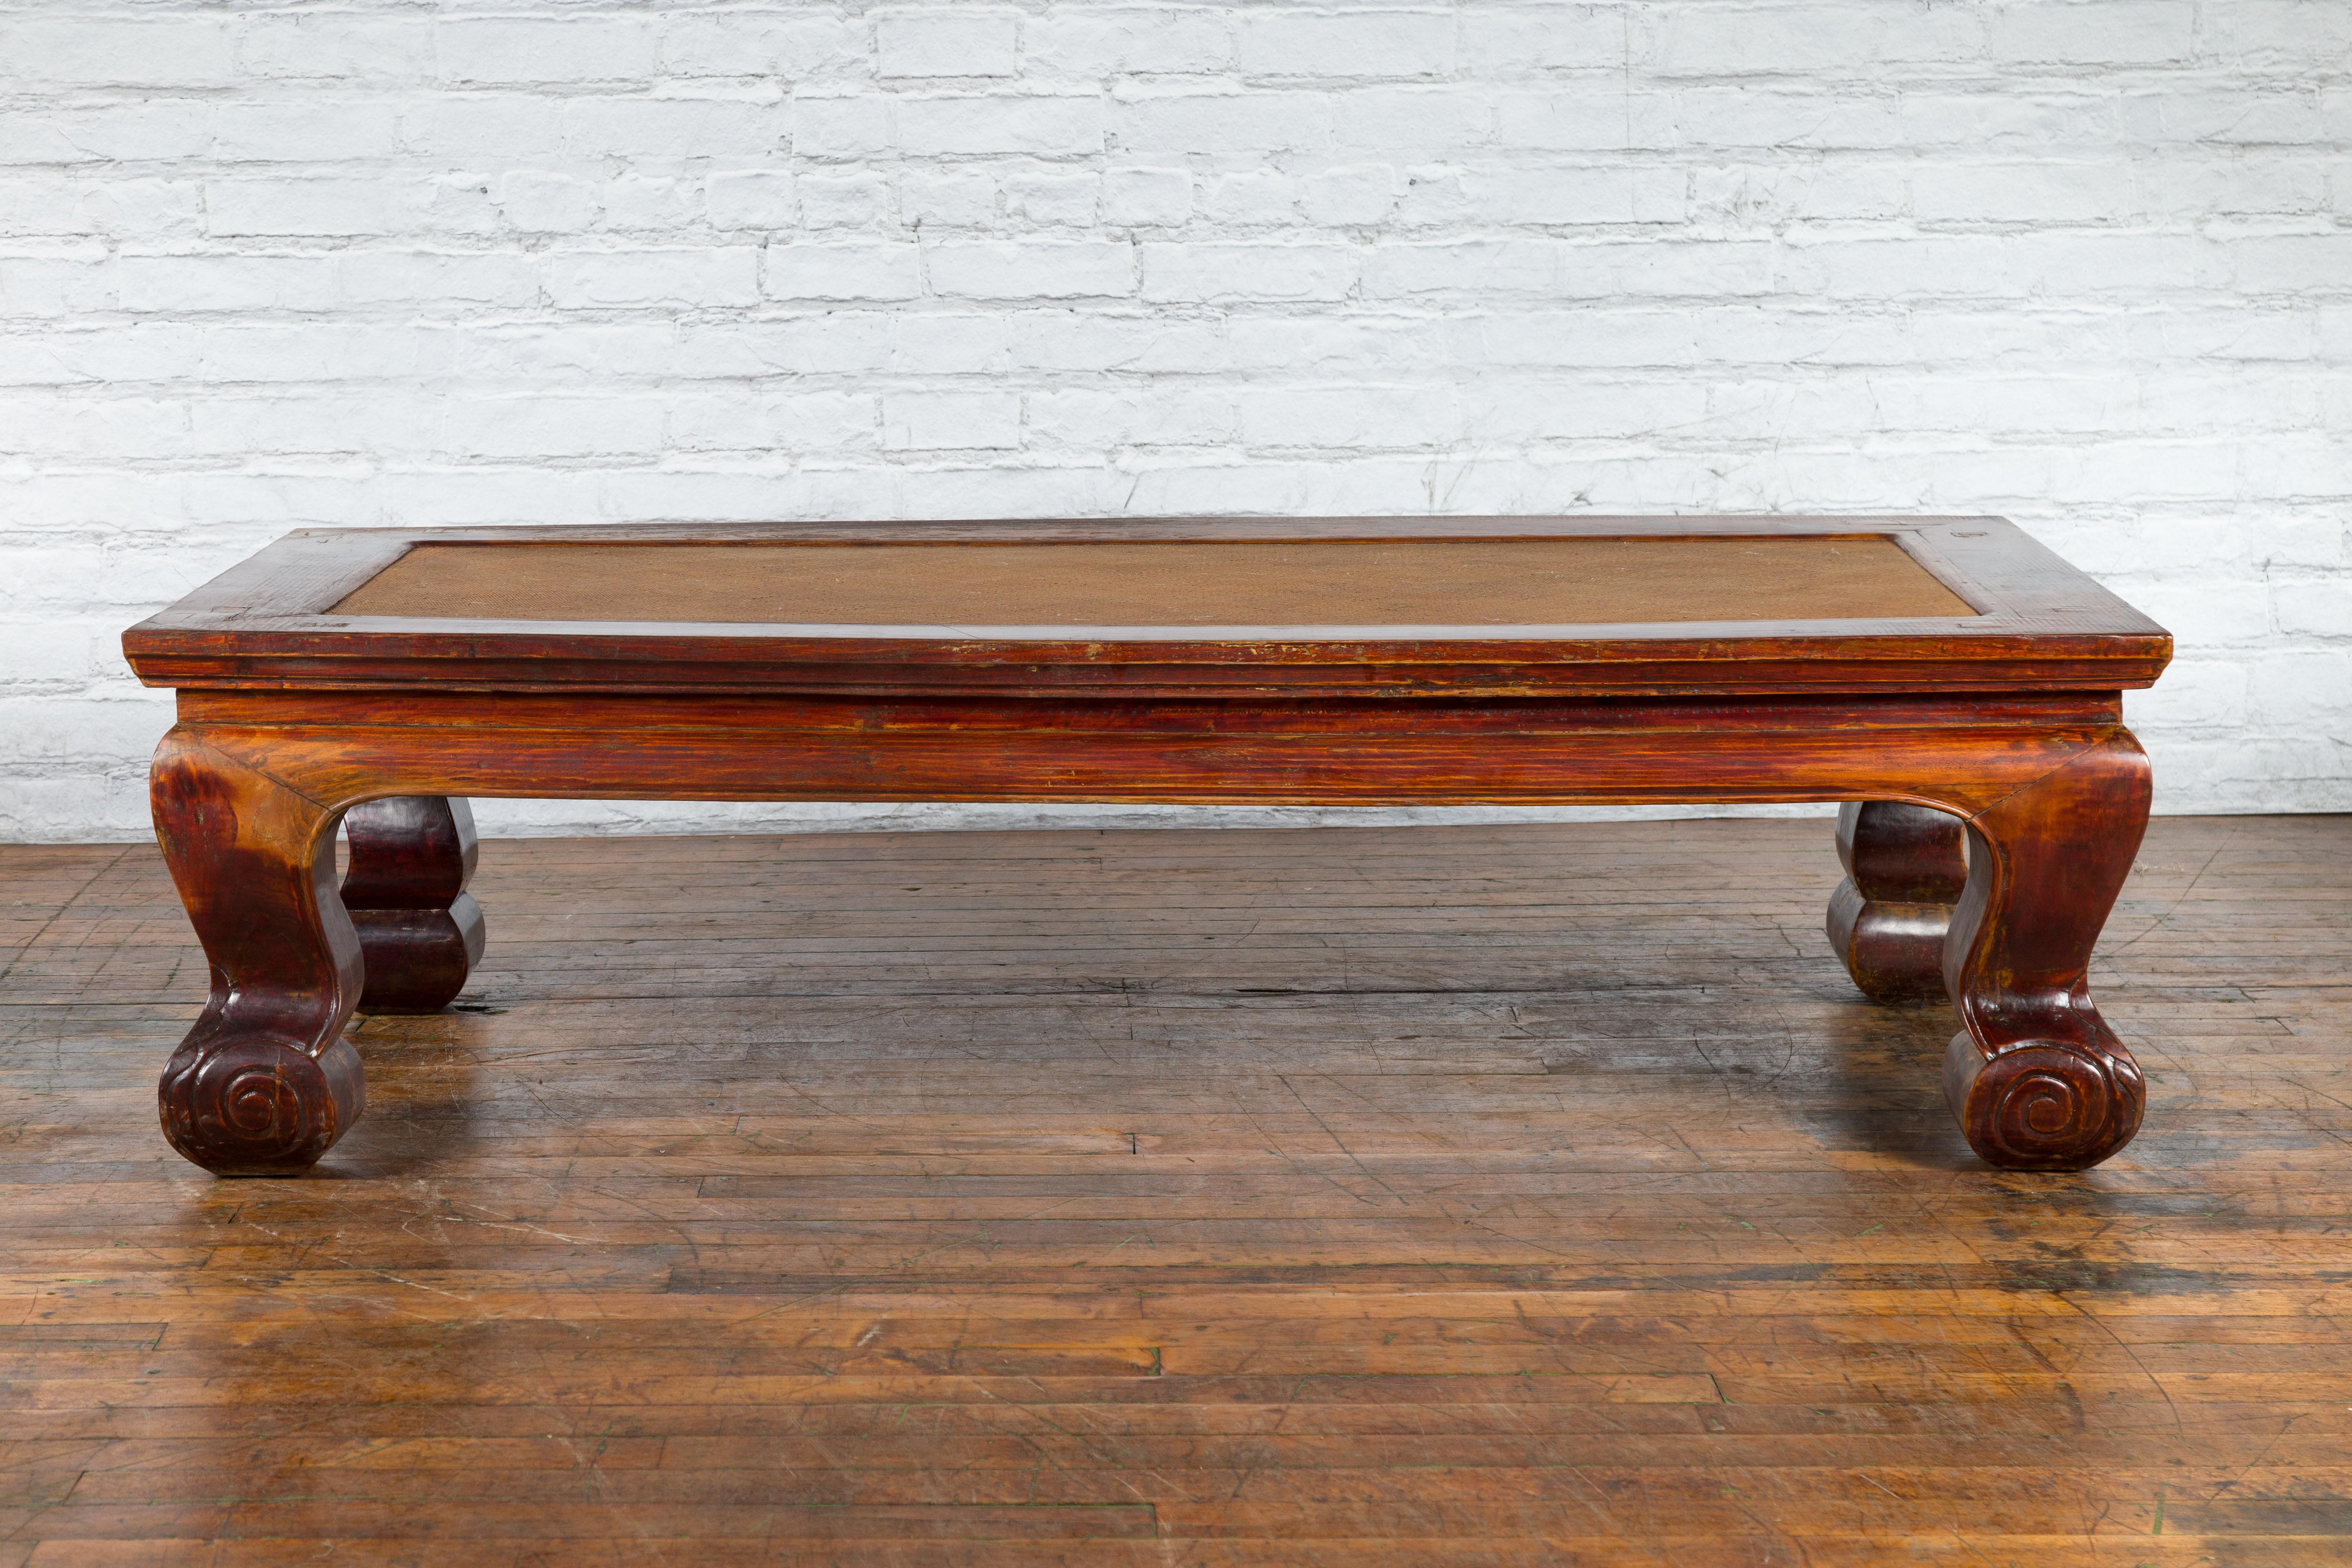 Chinese Qing Dynasty Period 19th Century Elm Coffee Table with Rattan Top In Good Condition For Sale In Yonkers, NY